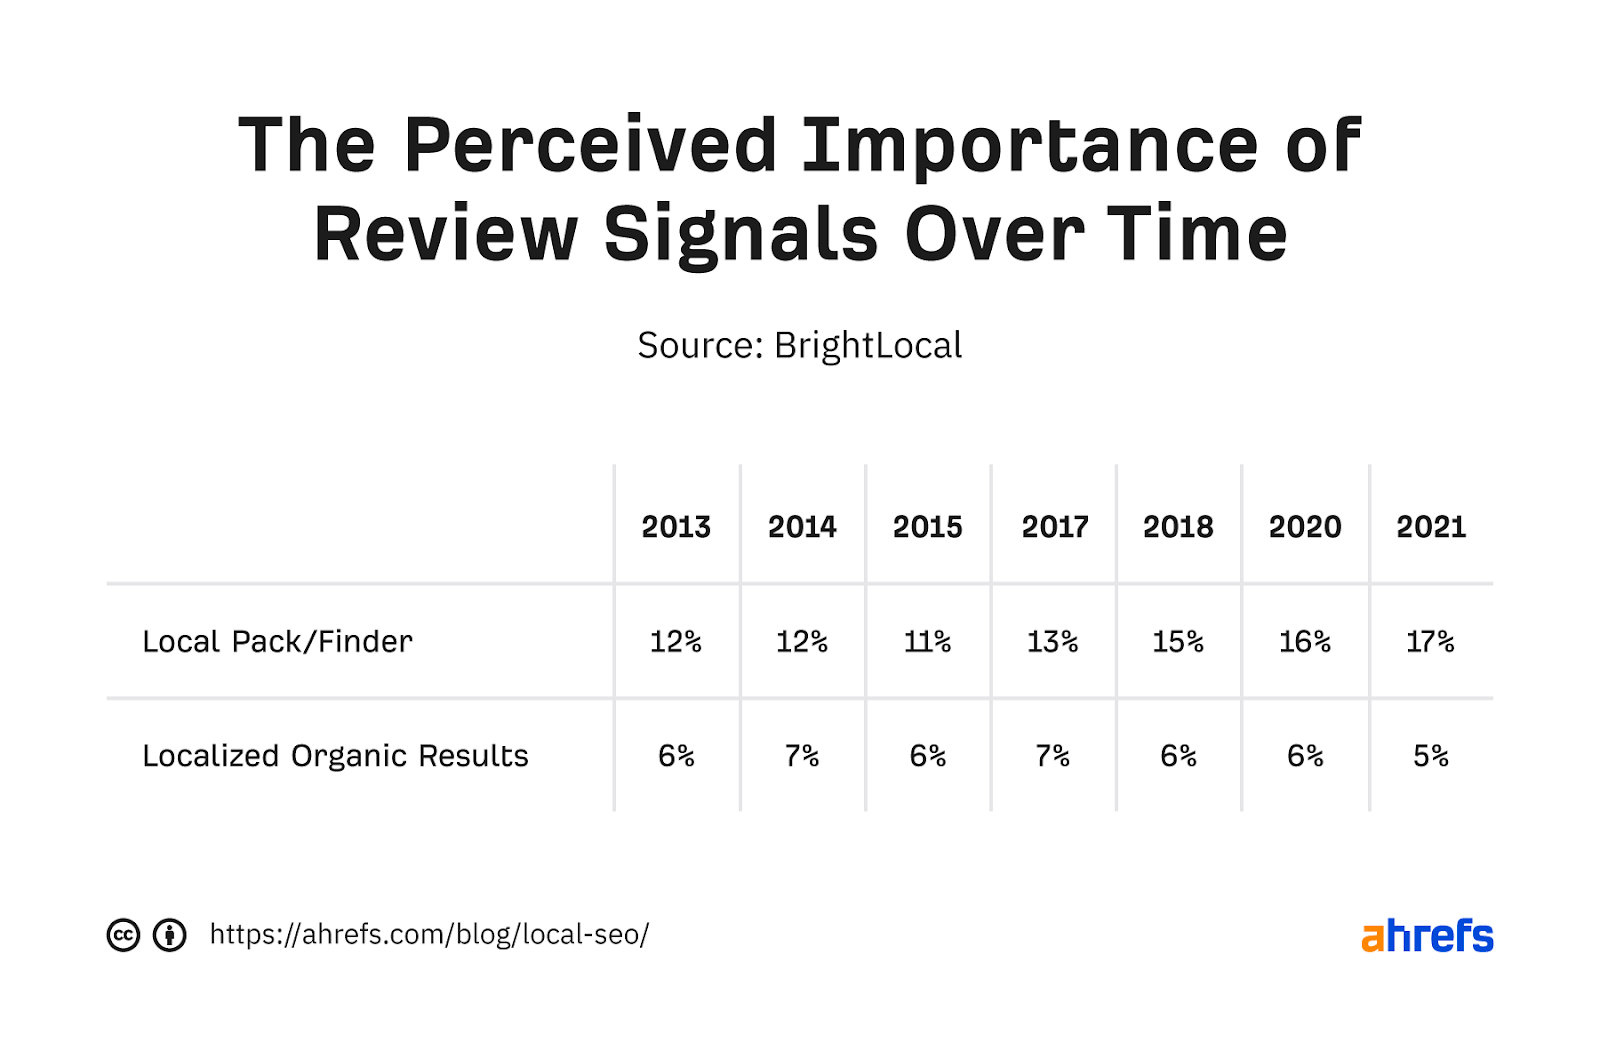 Reviews perceived importance over time